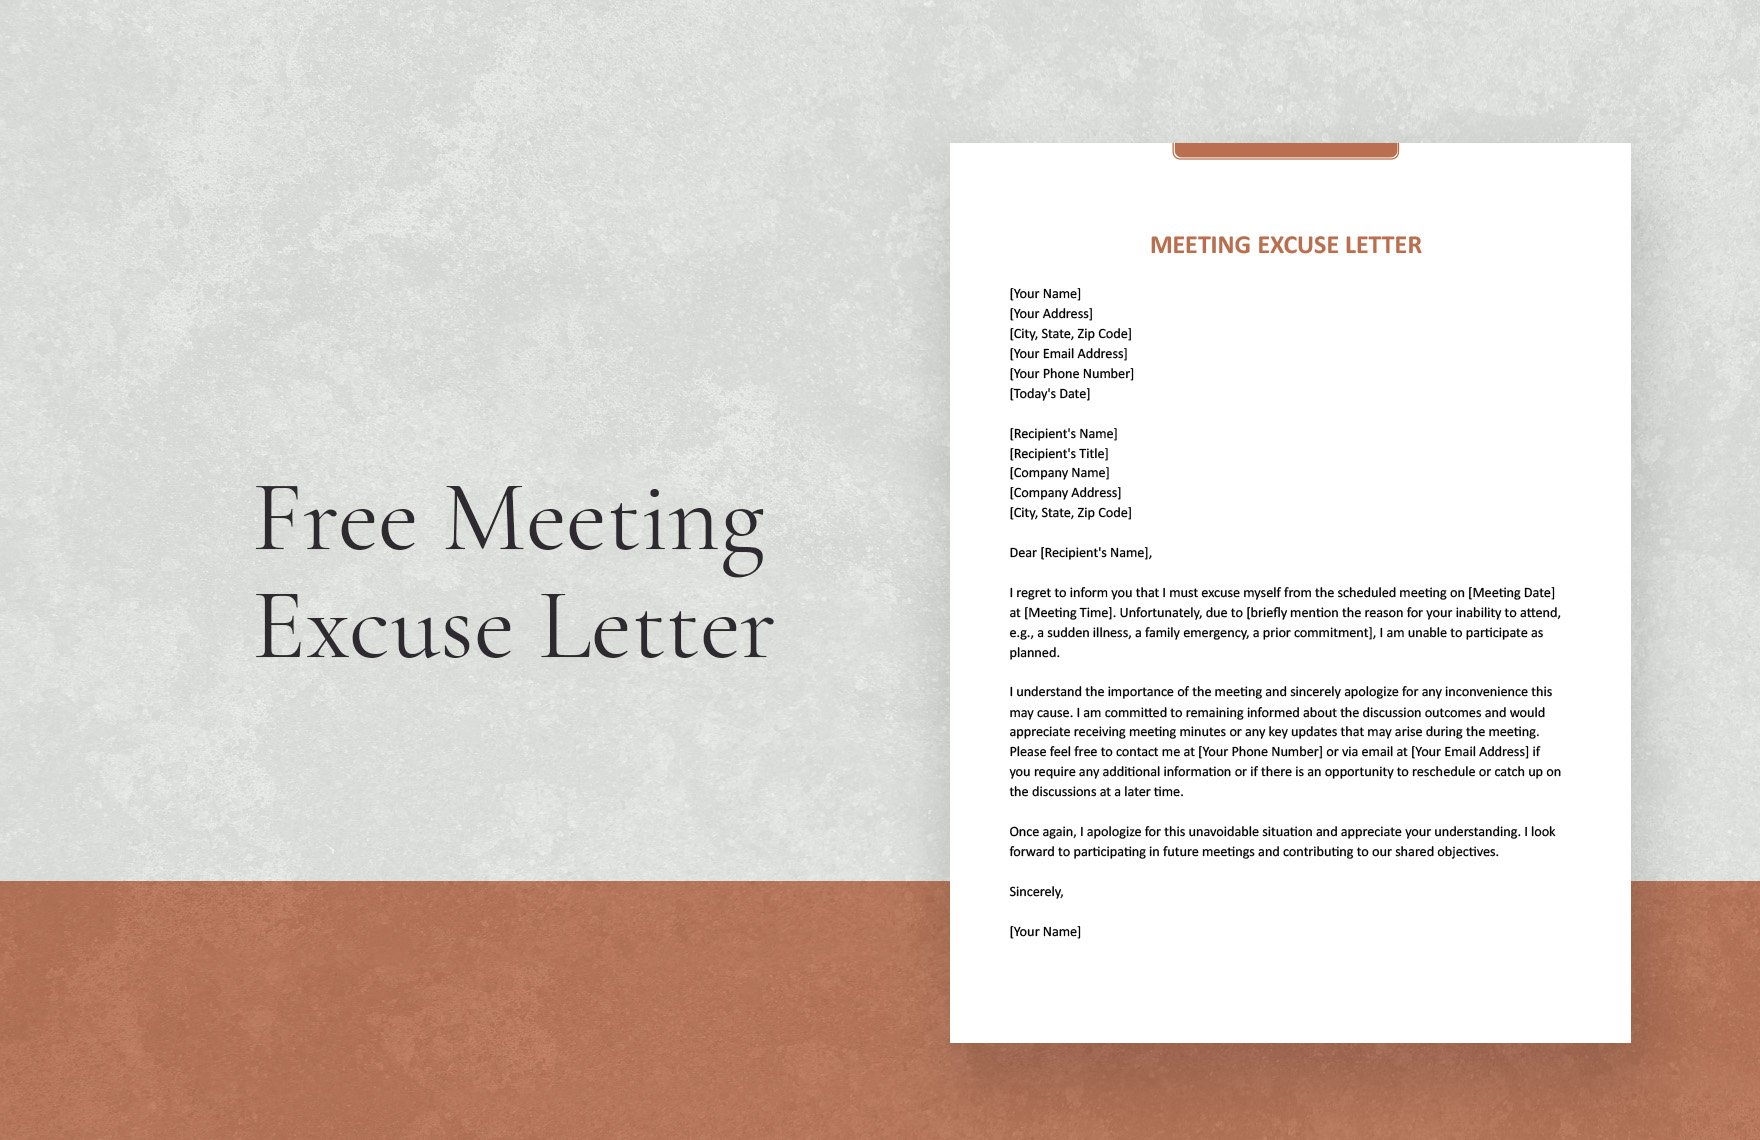 Free Meeting Excuse Letter